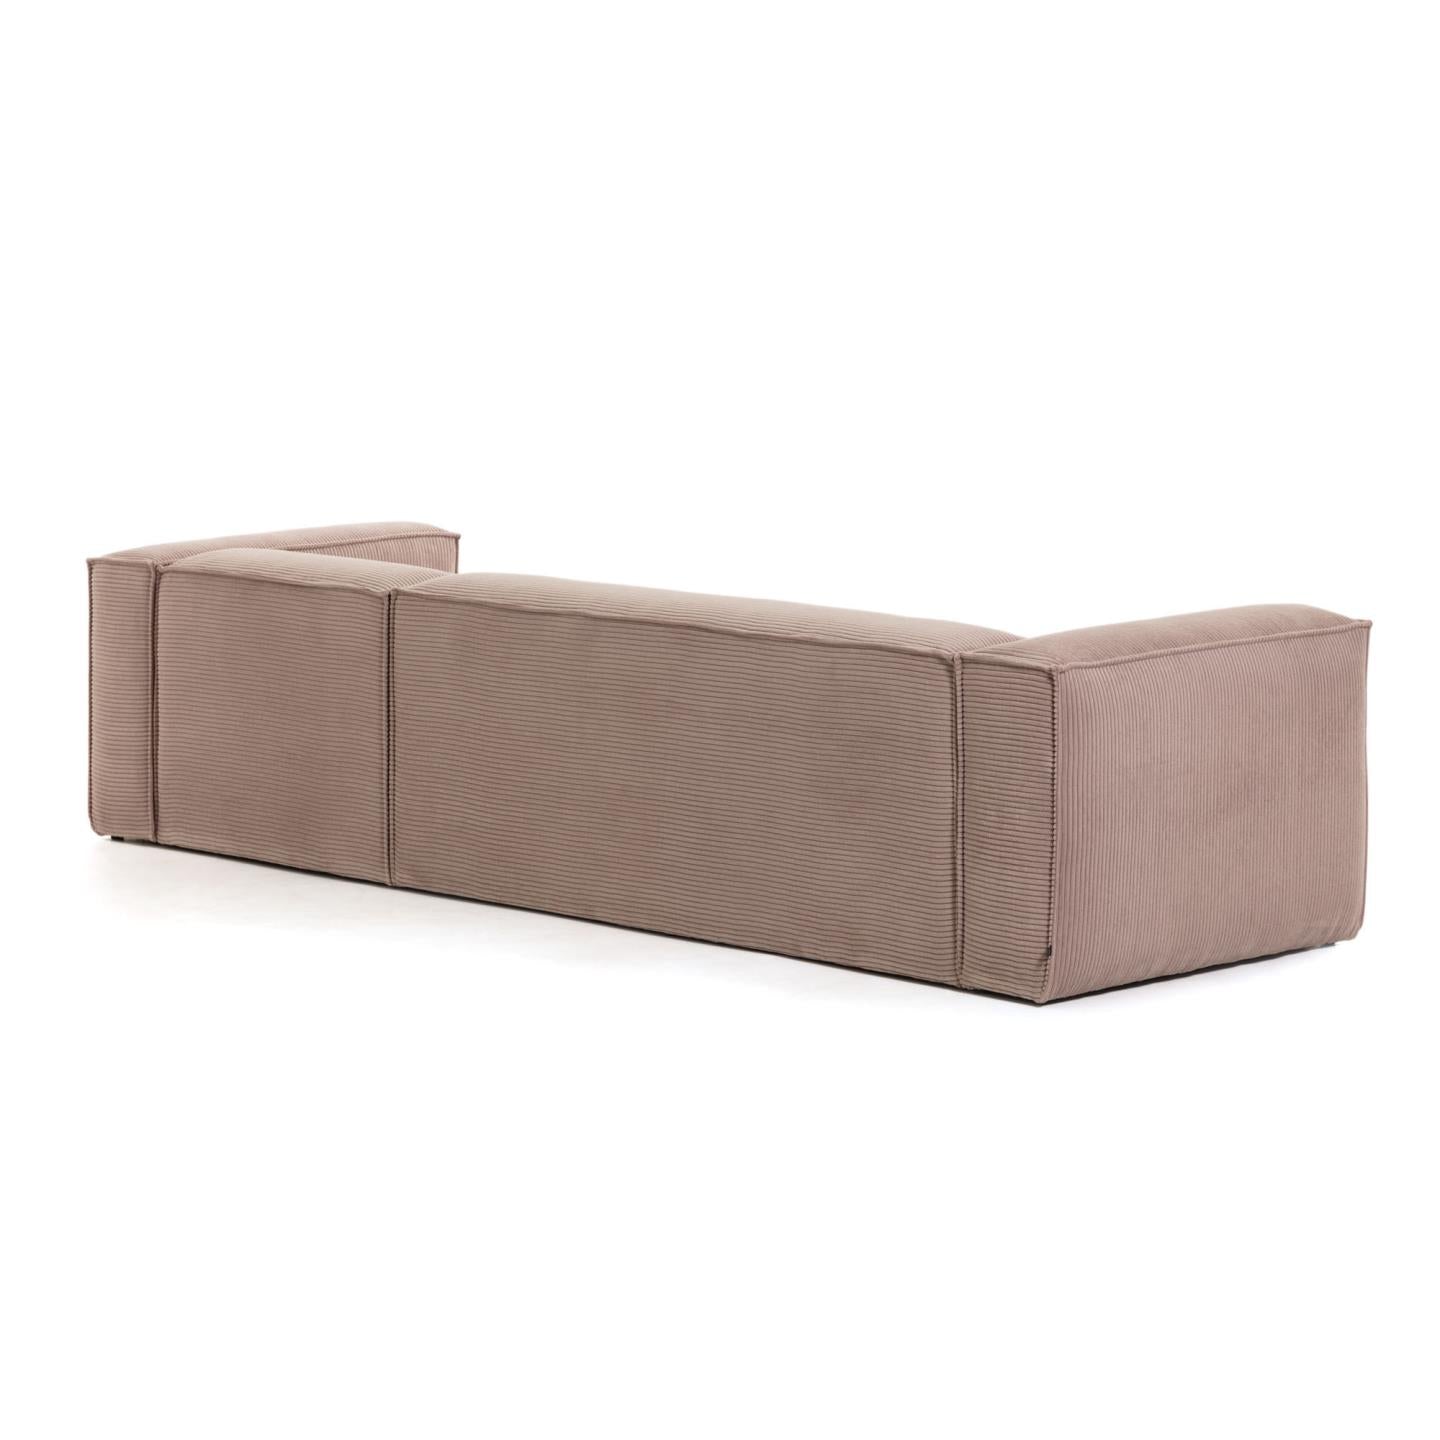 Blok 4 seater sofa with right side chaise longue in pink wide seam corduroy, 330 cm